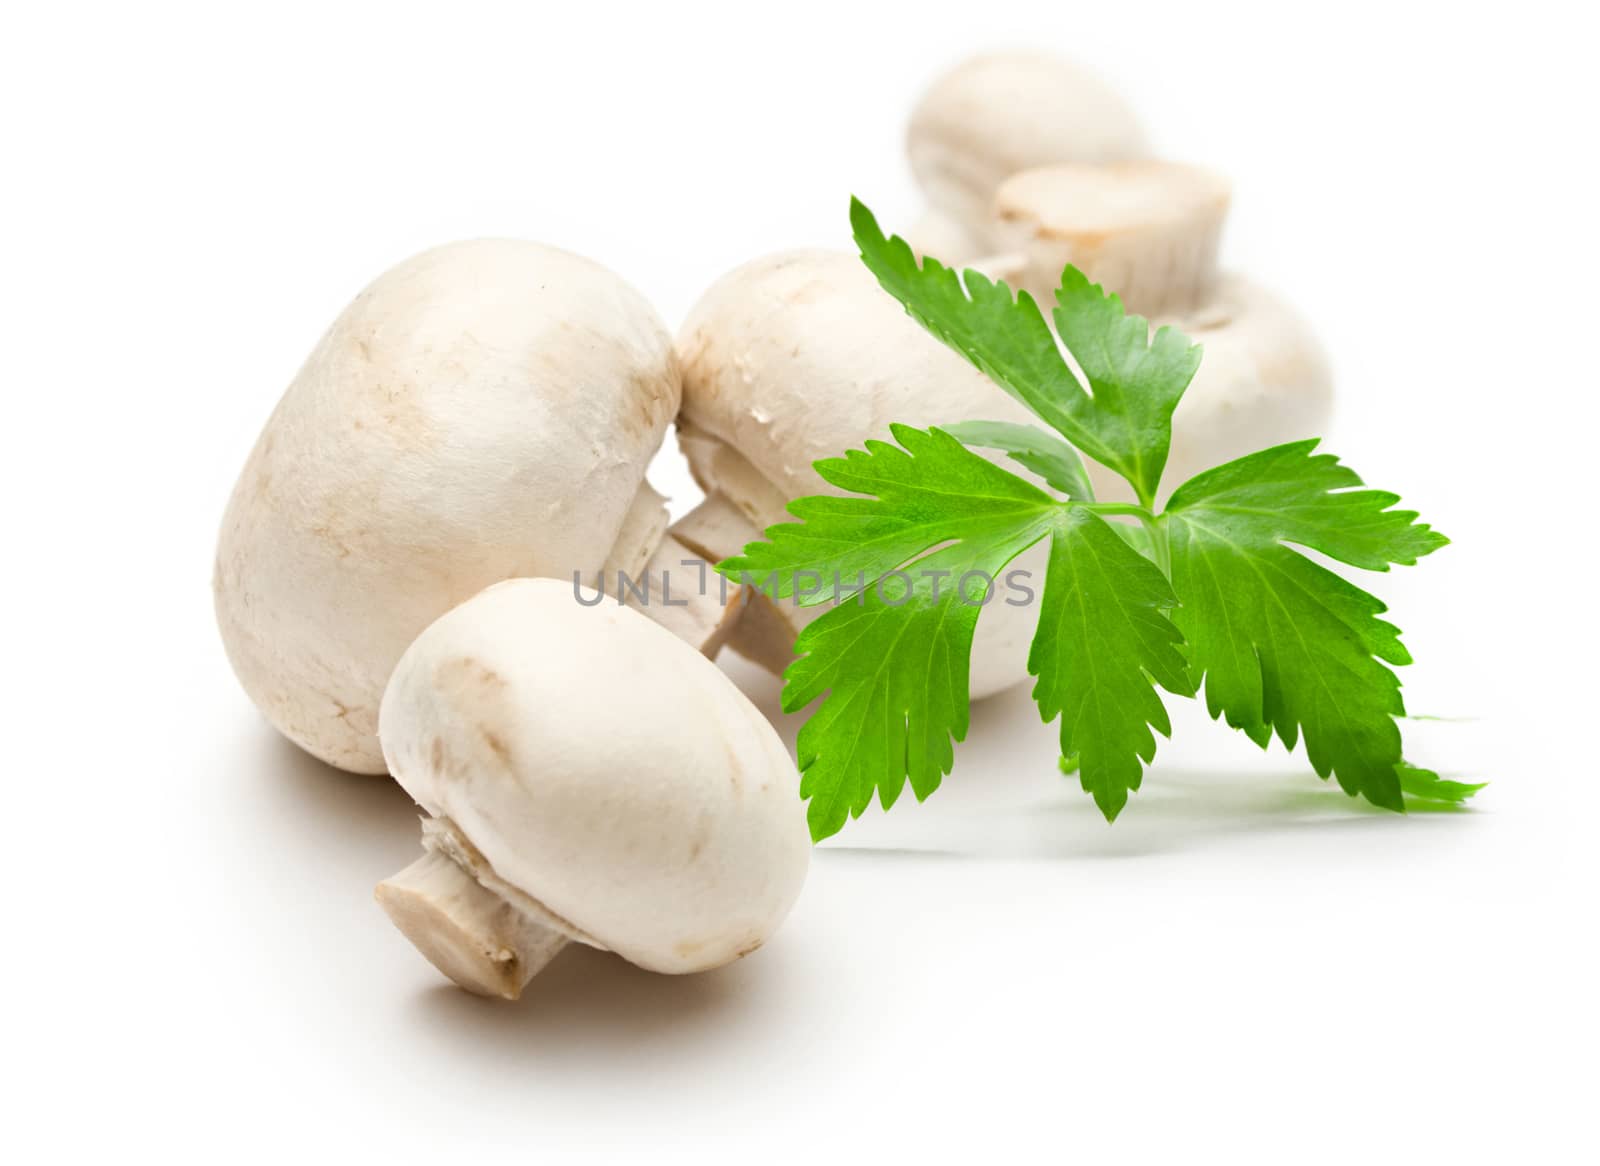 Champignon and parsley on white